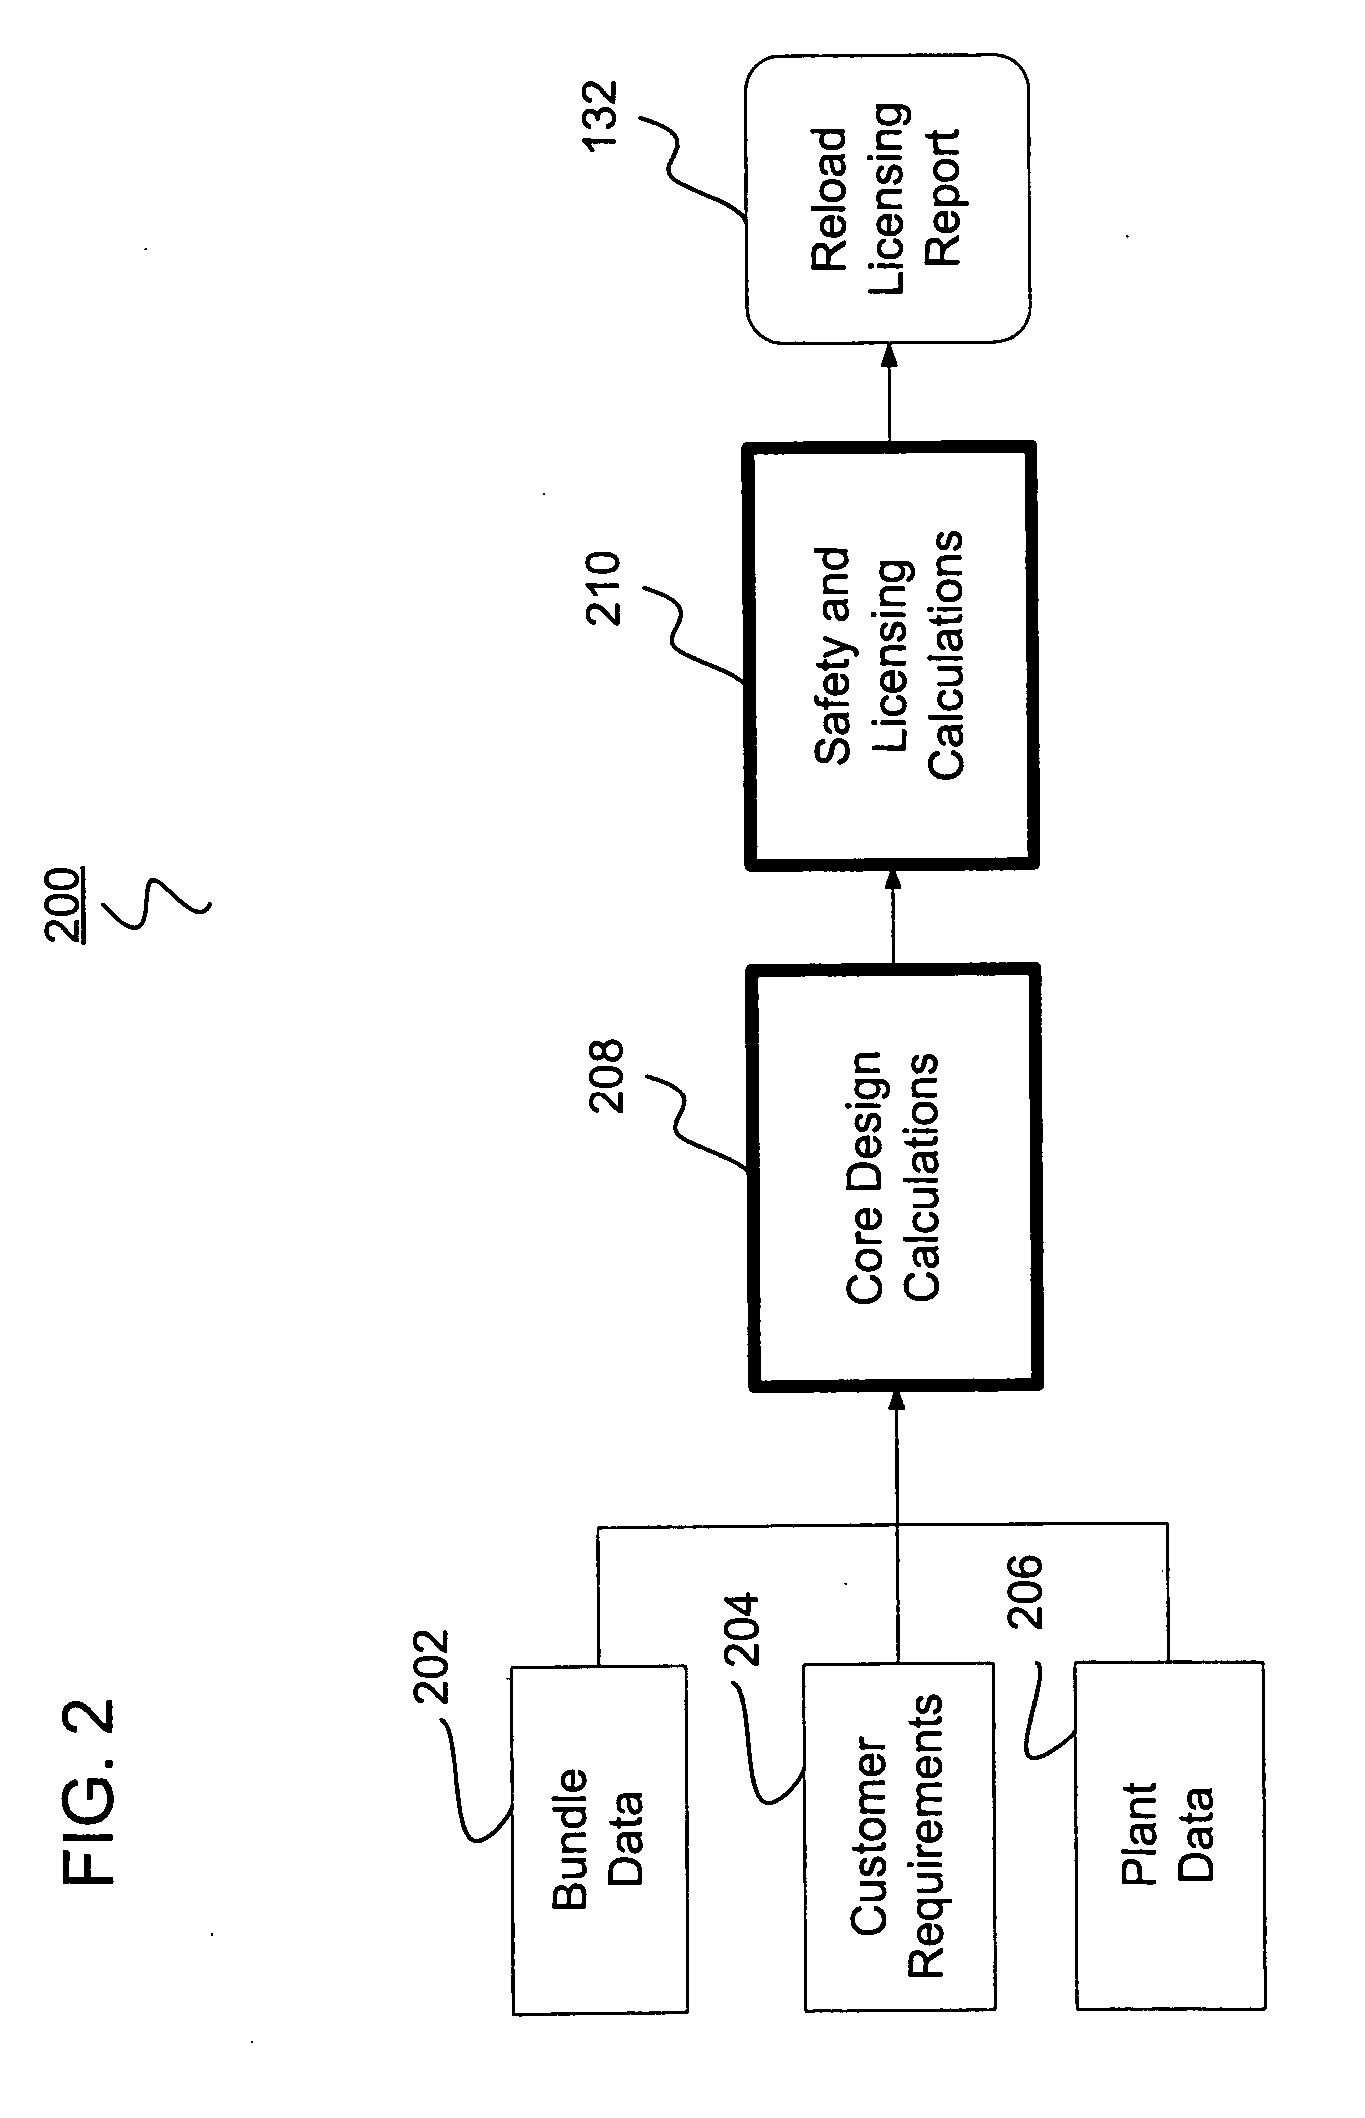 Nuclear reactor reload licensing analysis system and method